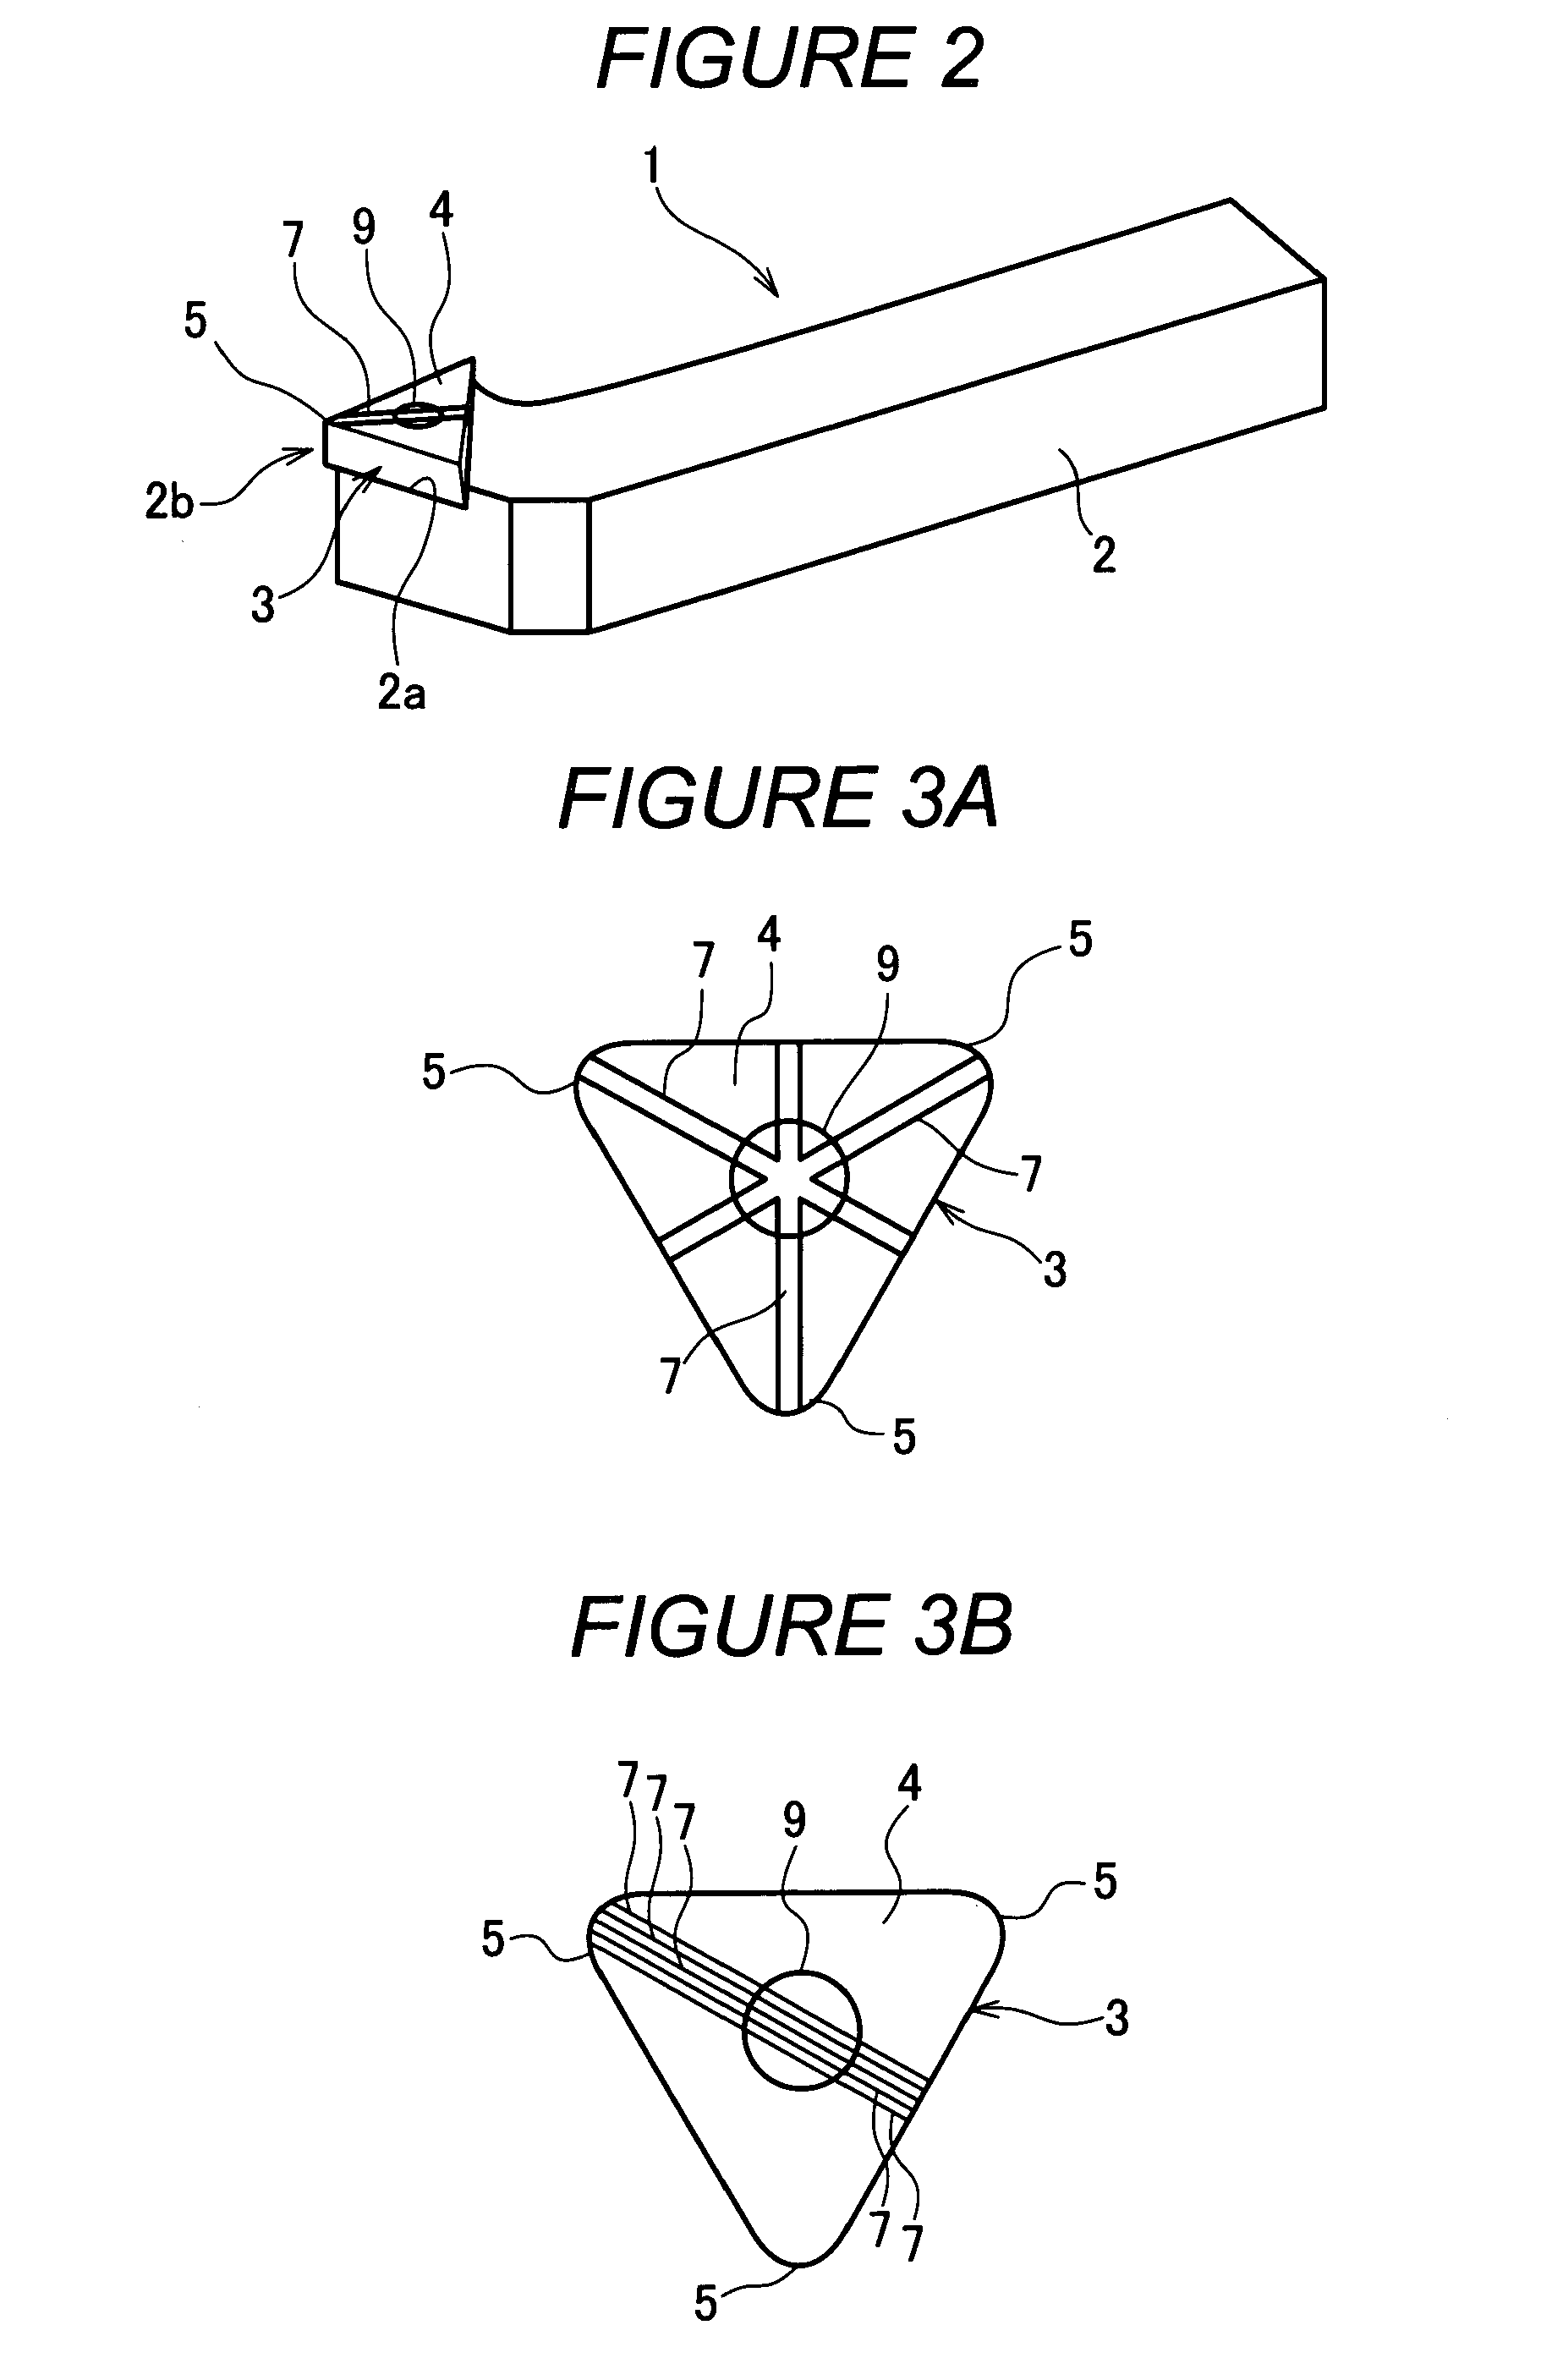 Machine tool with chip processing function